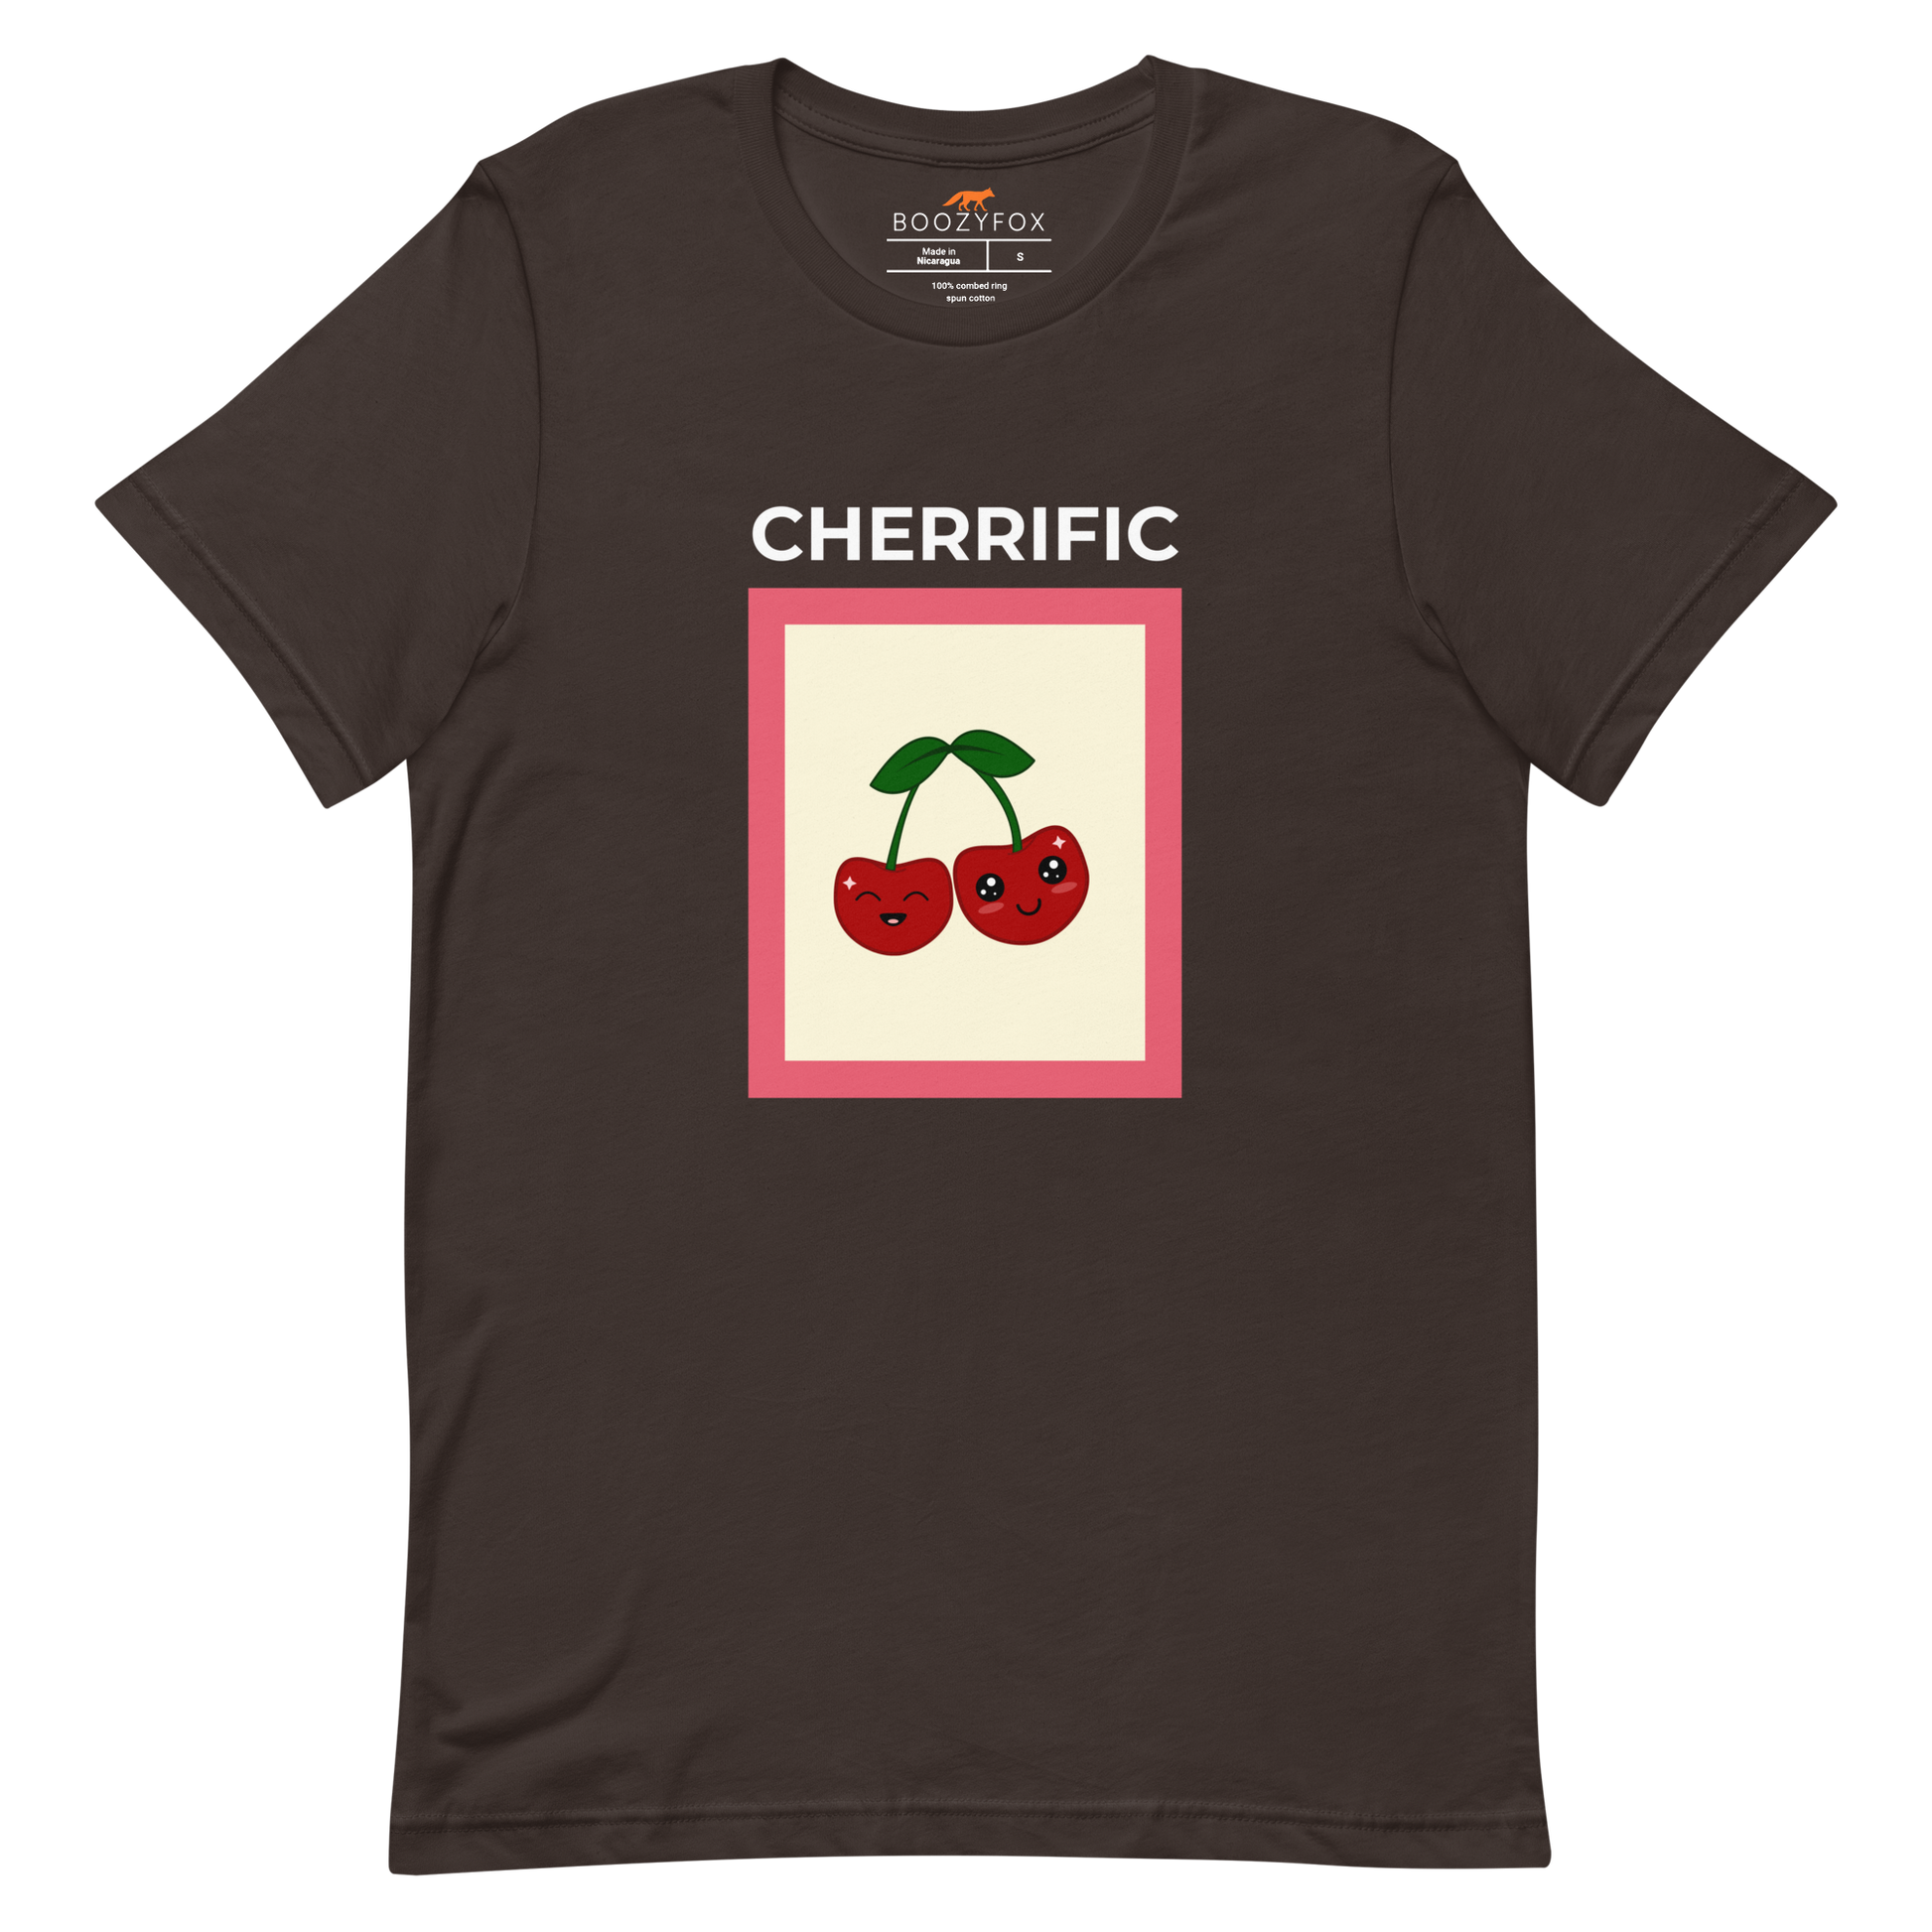 Brown Premium Cherry Tee featuring a Cherrific graphic on the chest - Funny Graphic Cherry Tees - Boozy Fox